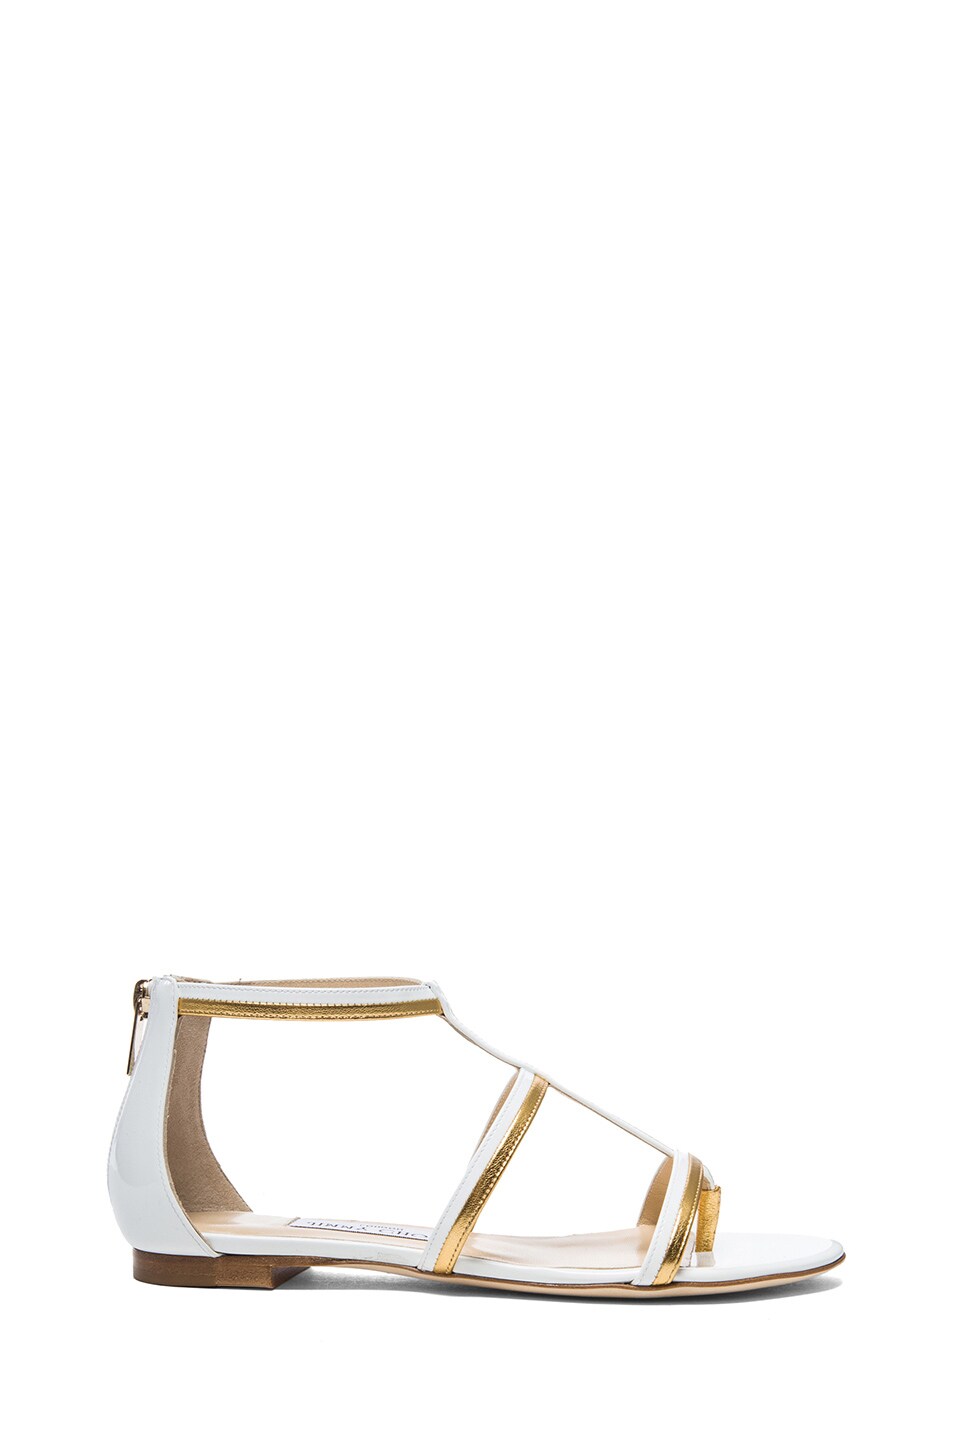 Image 1 of Jimmy Choo Tabitha Patent Leather Sandals in White & Gold